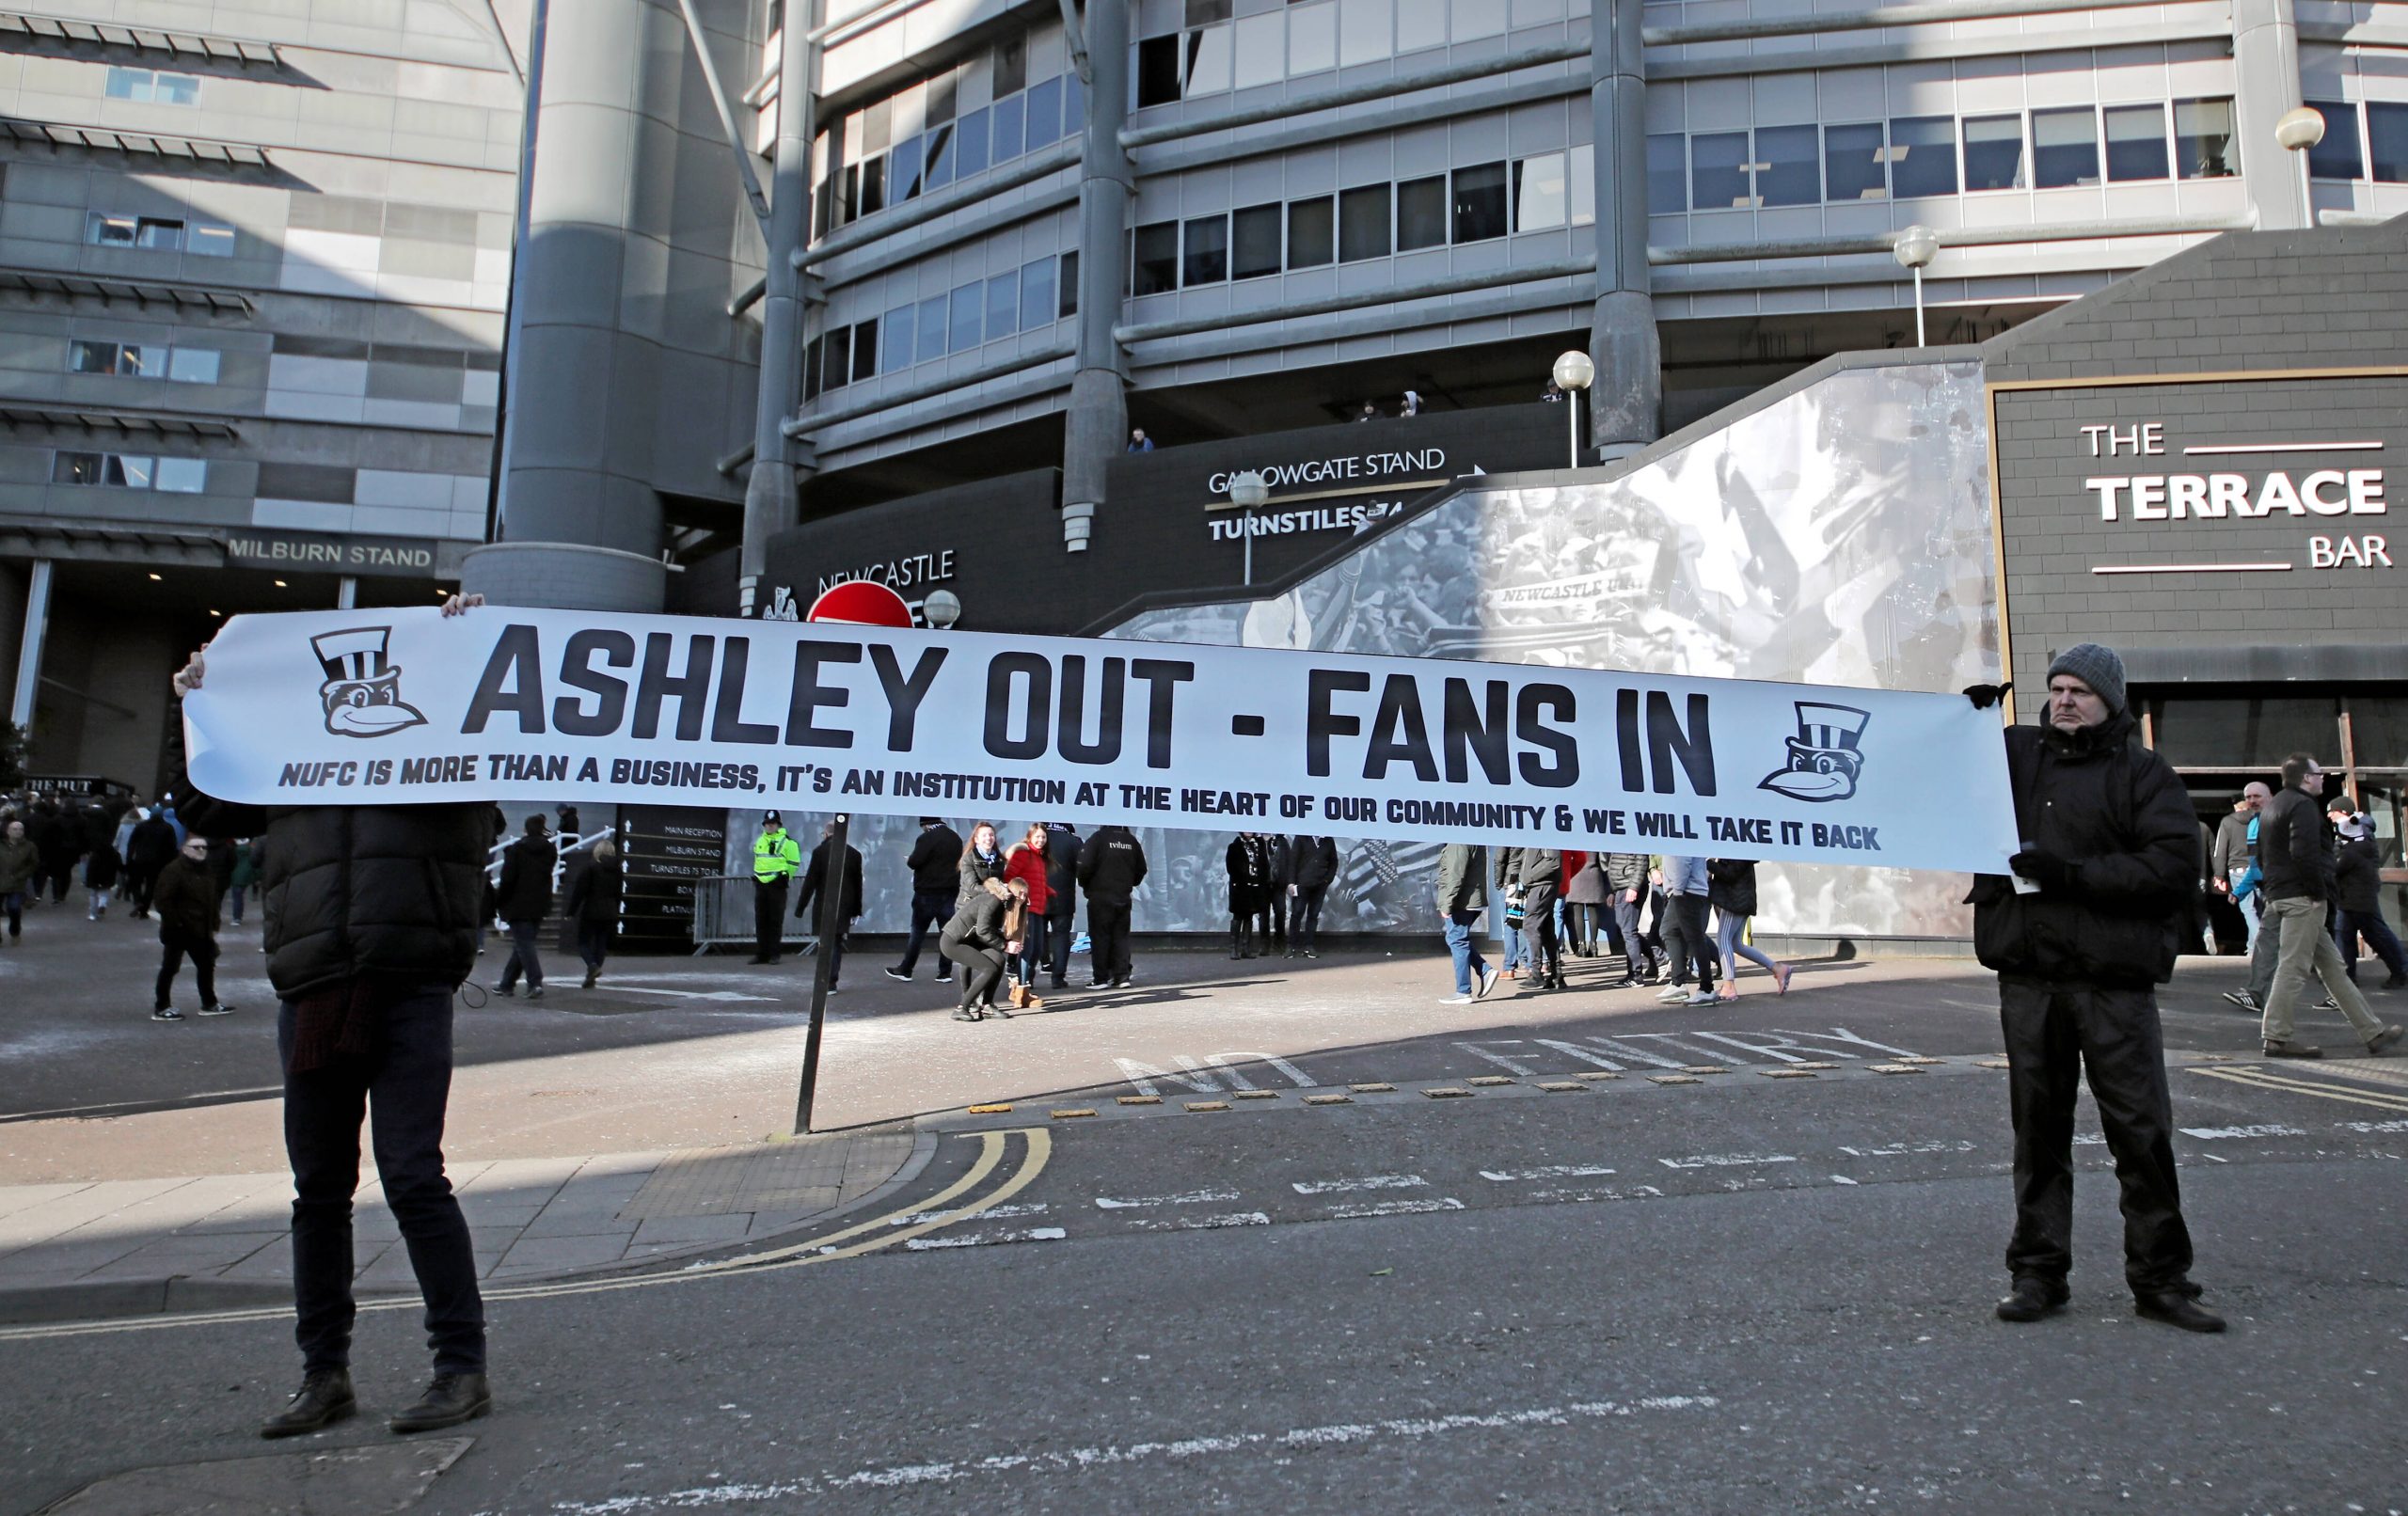 Newcastle United fans protest the club's ownership